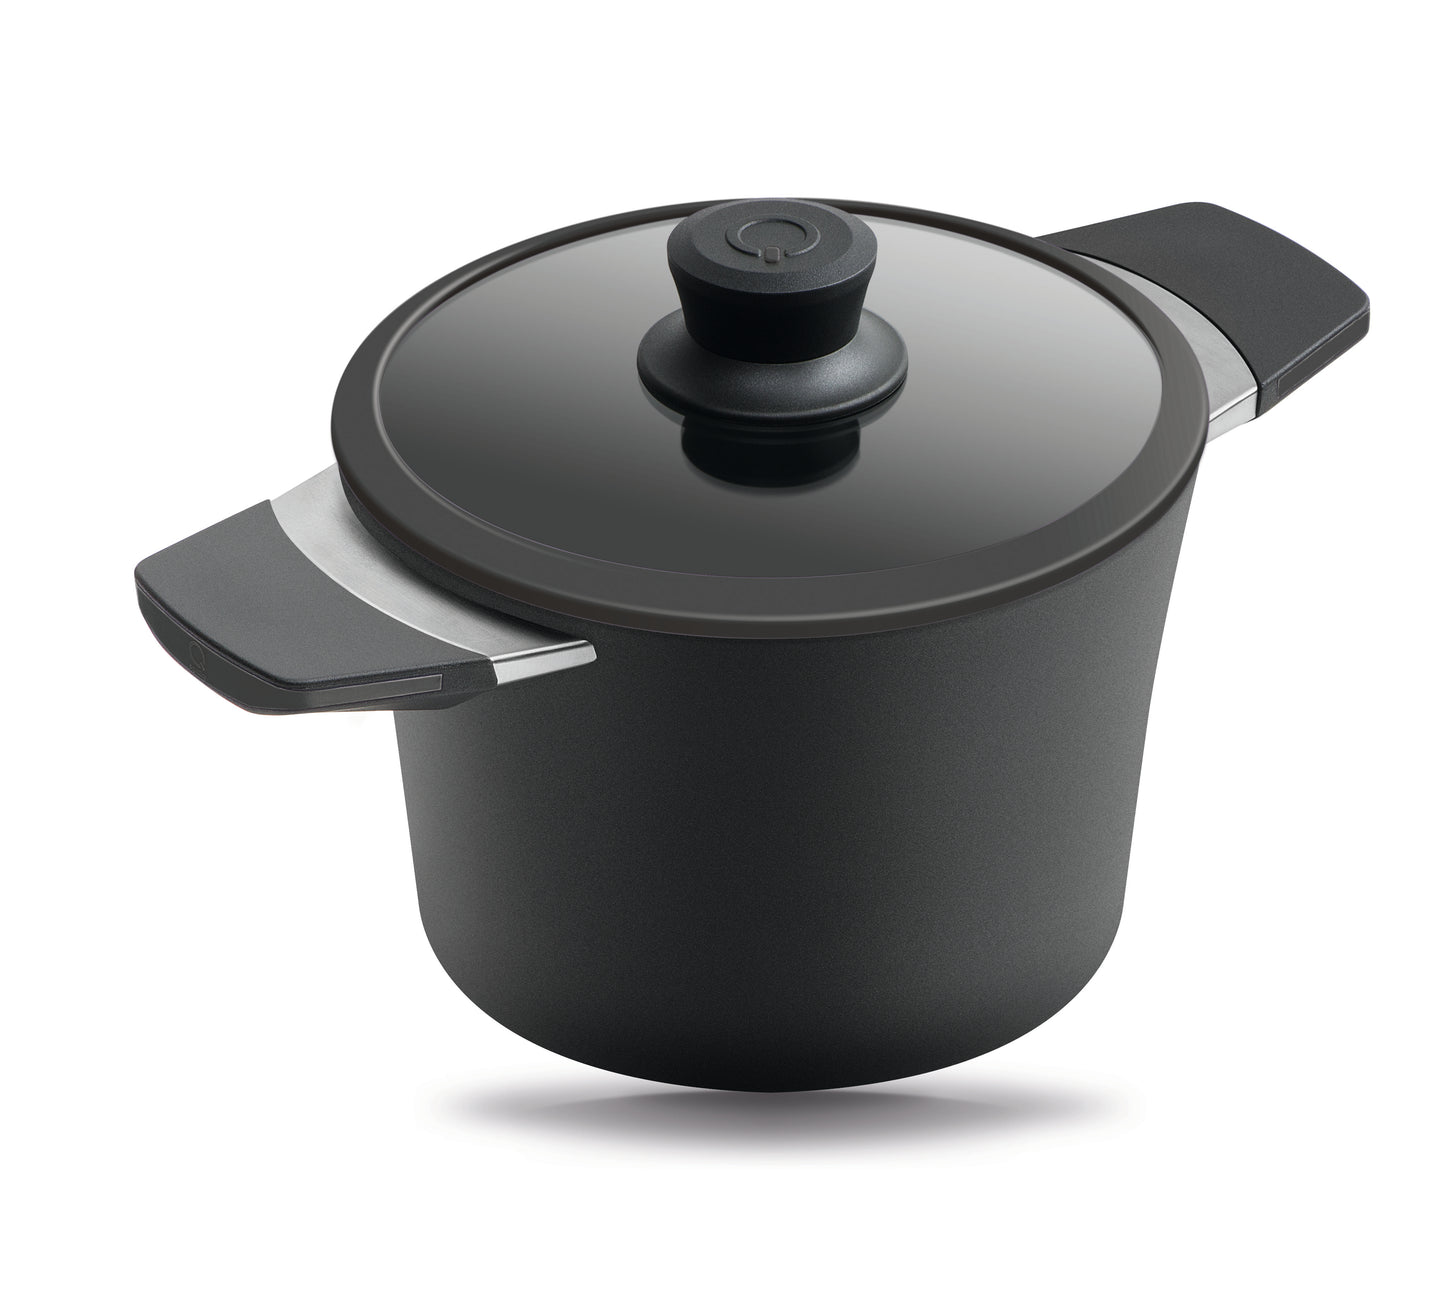 Squality Biotan Non-Stick Induction Stock Pot With Lid 2.5L - Grey